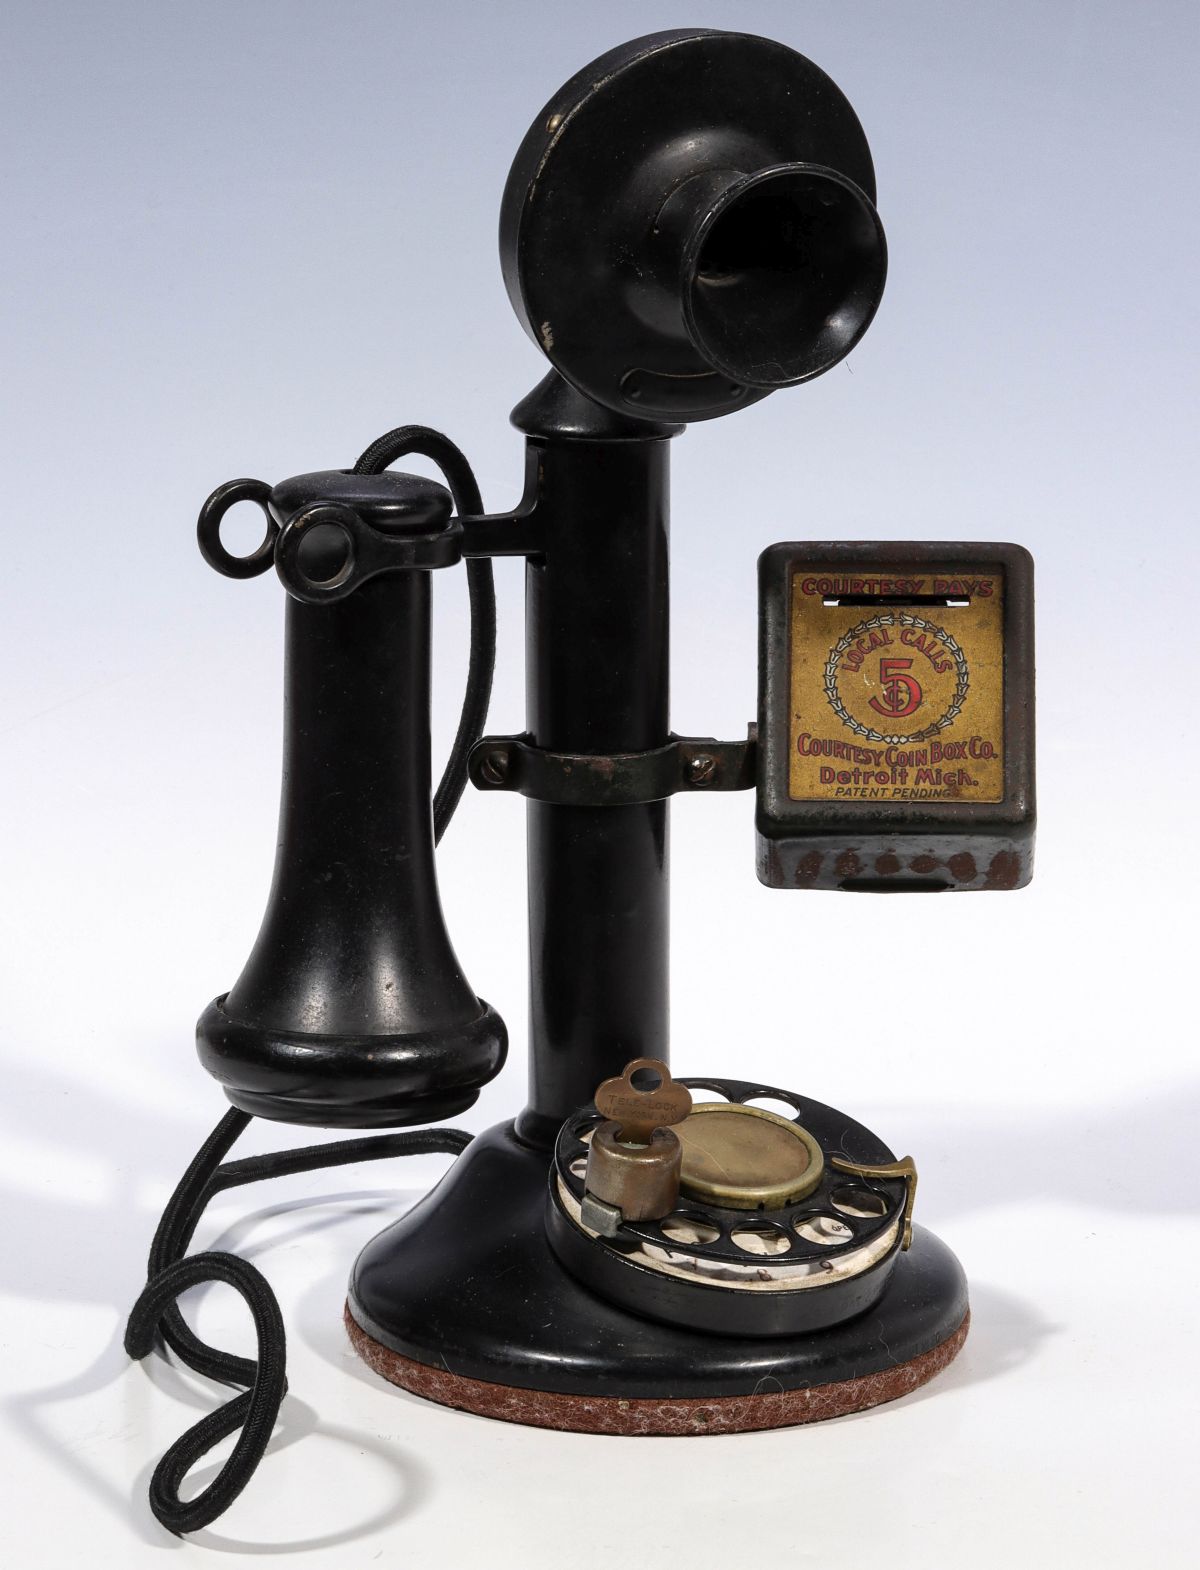 AN EARLY 20TH C. CANDLESTICK PHONE WITH 5Â¢ PAY BOX